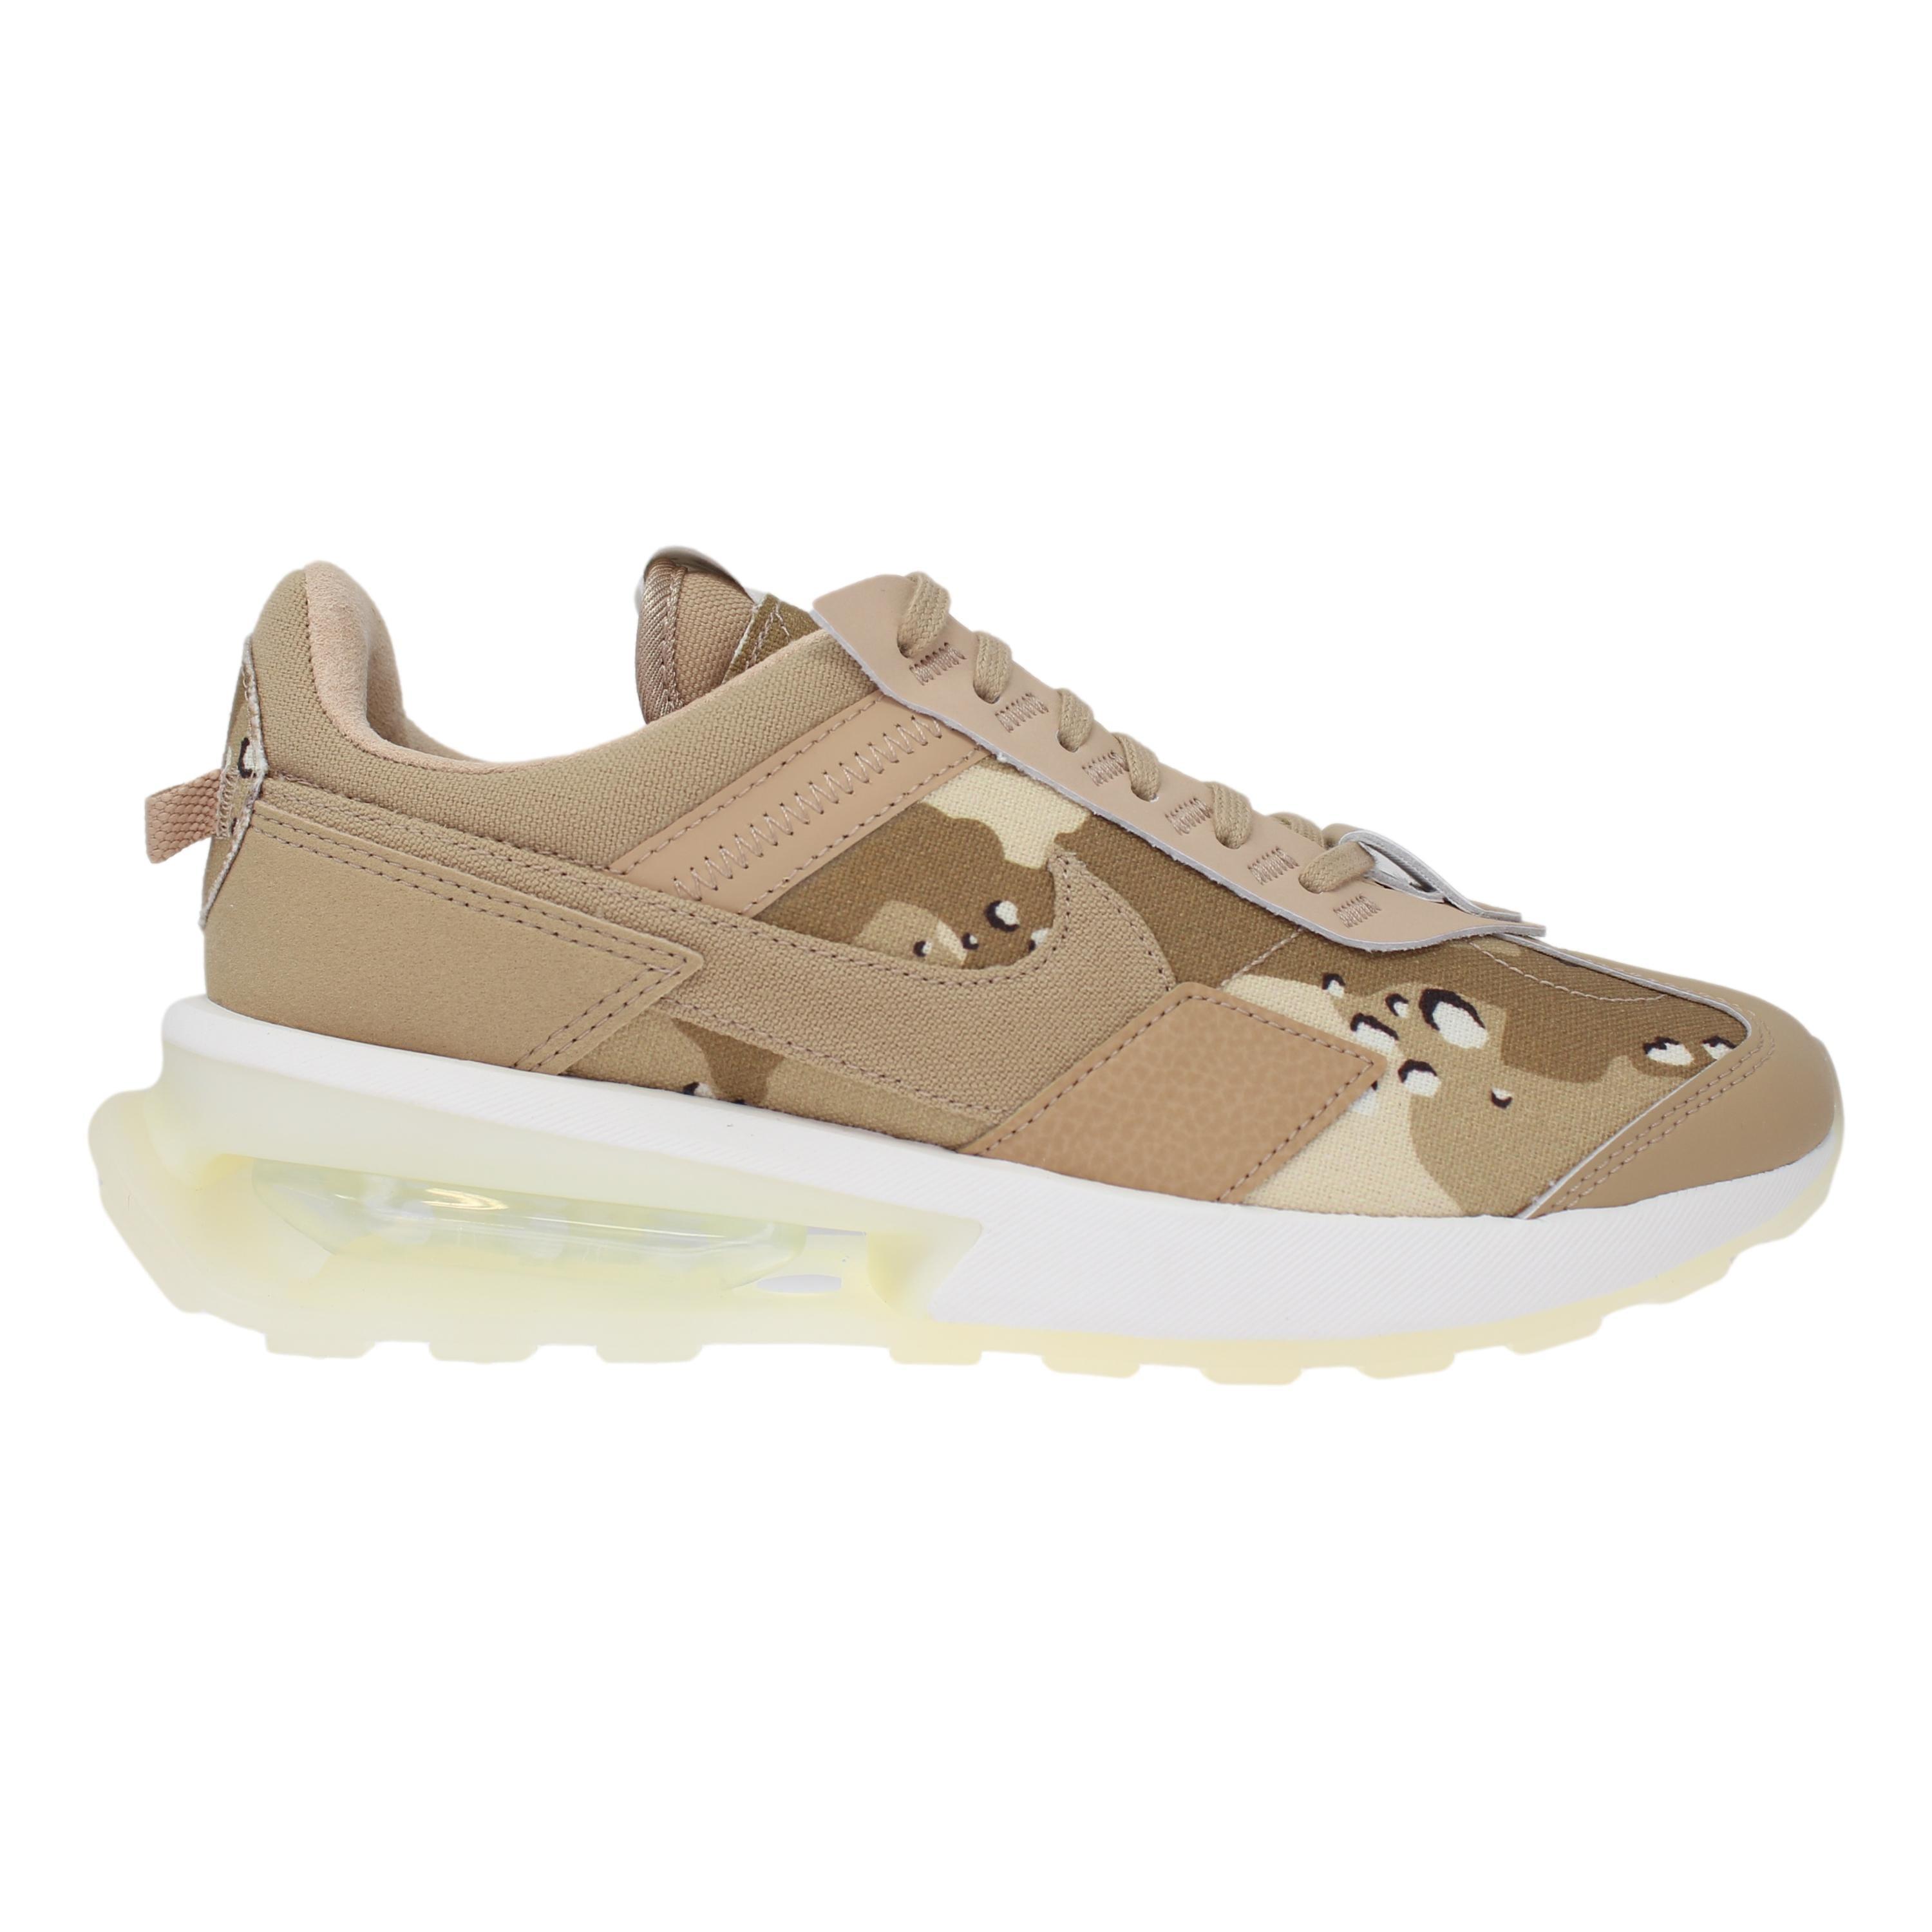 Nike Air Max Pre-day Se Hemp/light Soft Pink-sail Dx2312-200 in Natural |  Lyst